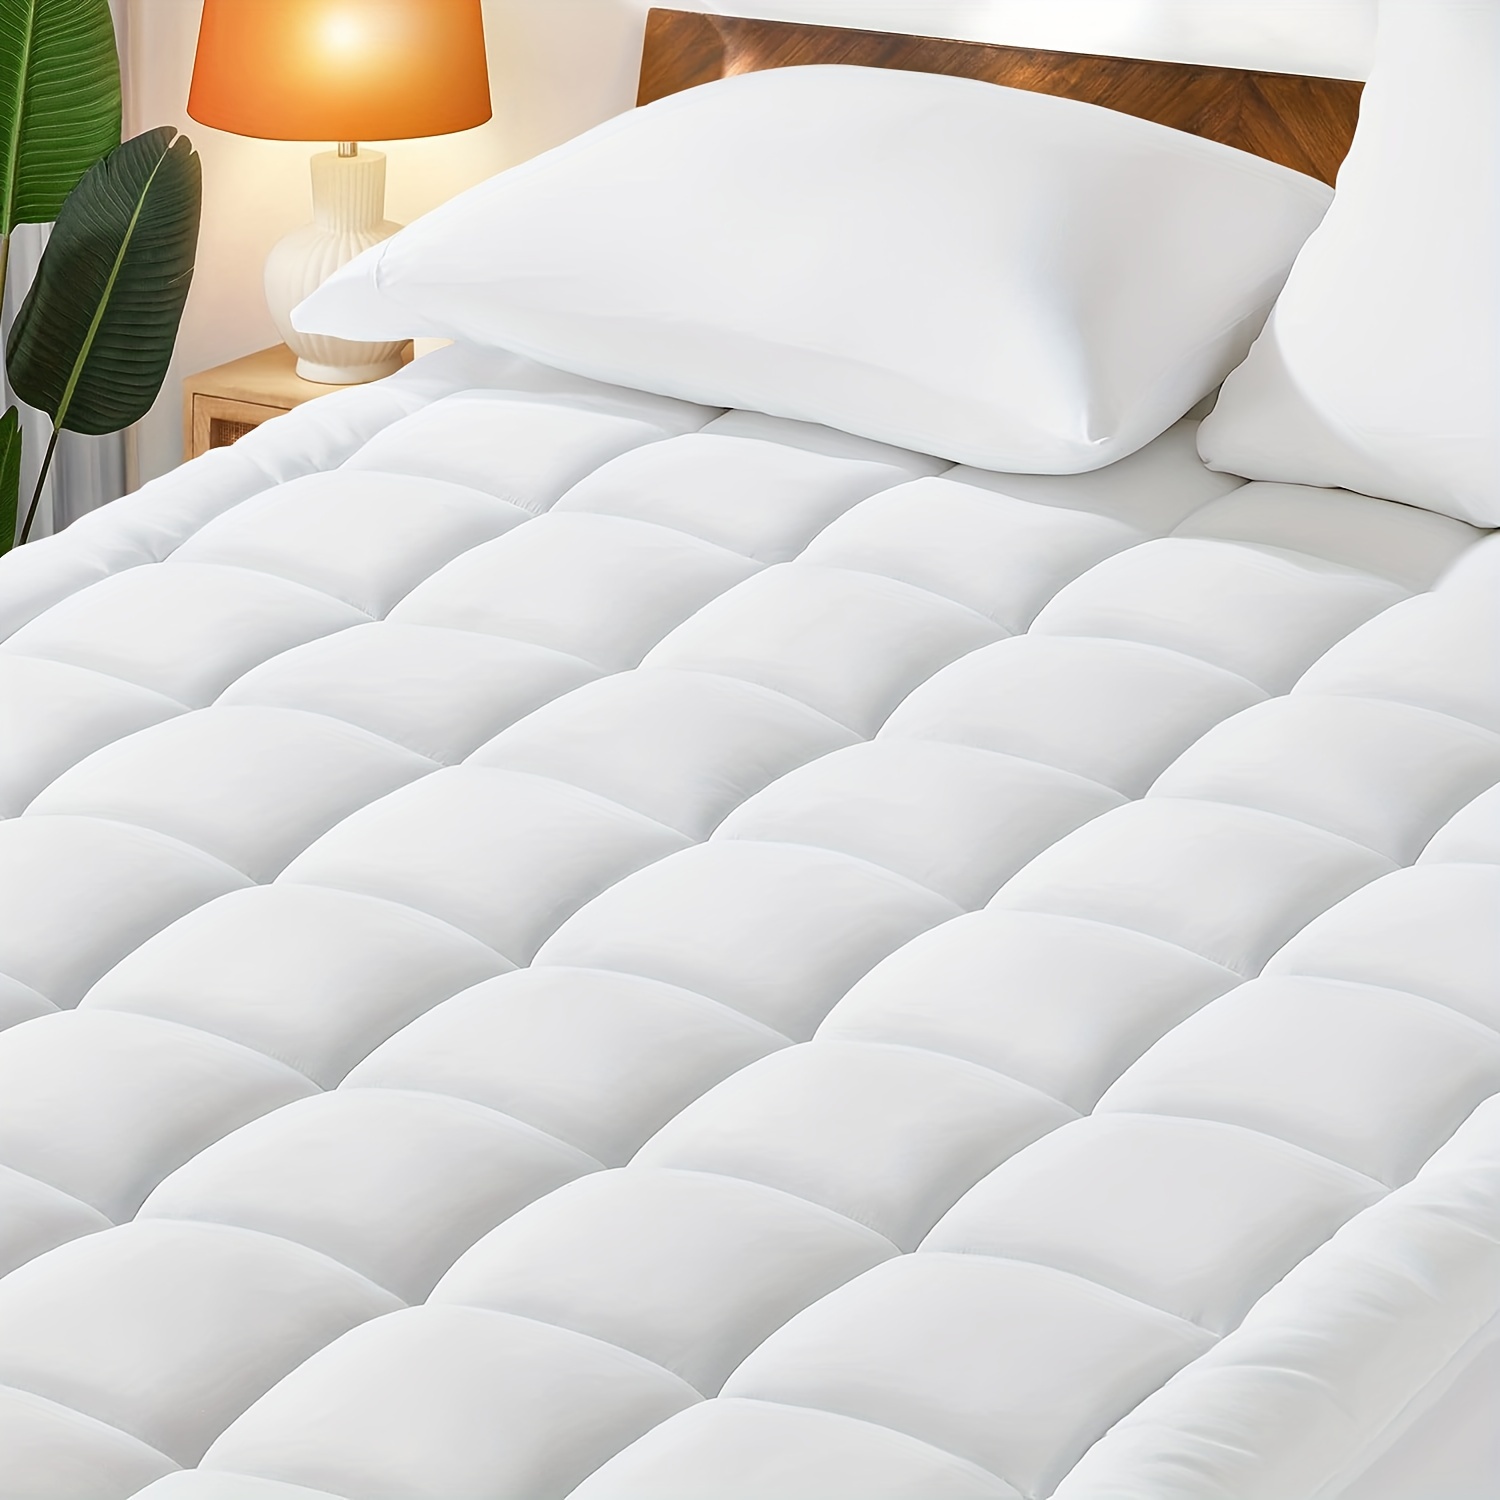 King Premium Waterproof Mattress Protector, Soft Breathable Mattress Pad  Cover, Noiseless Waterproof Bed Cover - Stretch to 21 Fitted Deep Pocket